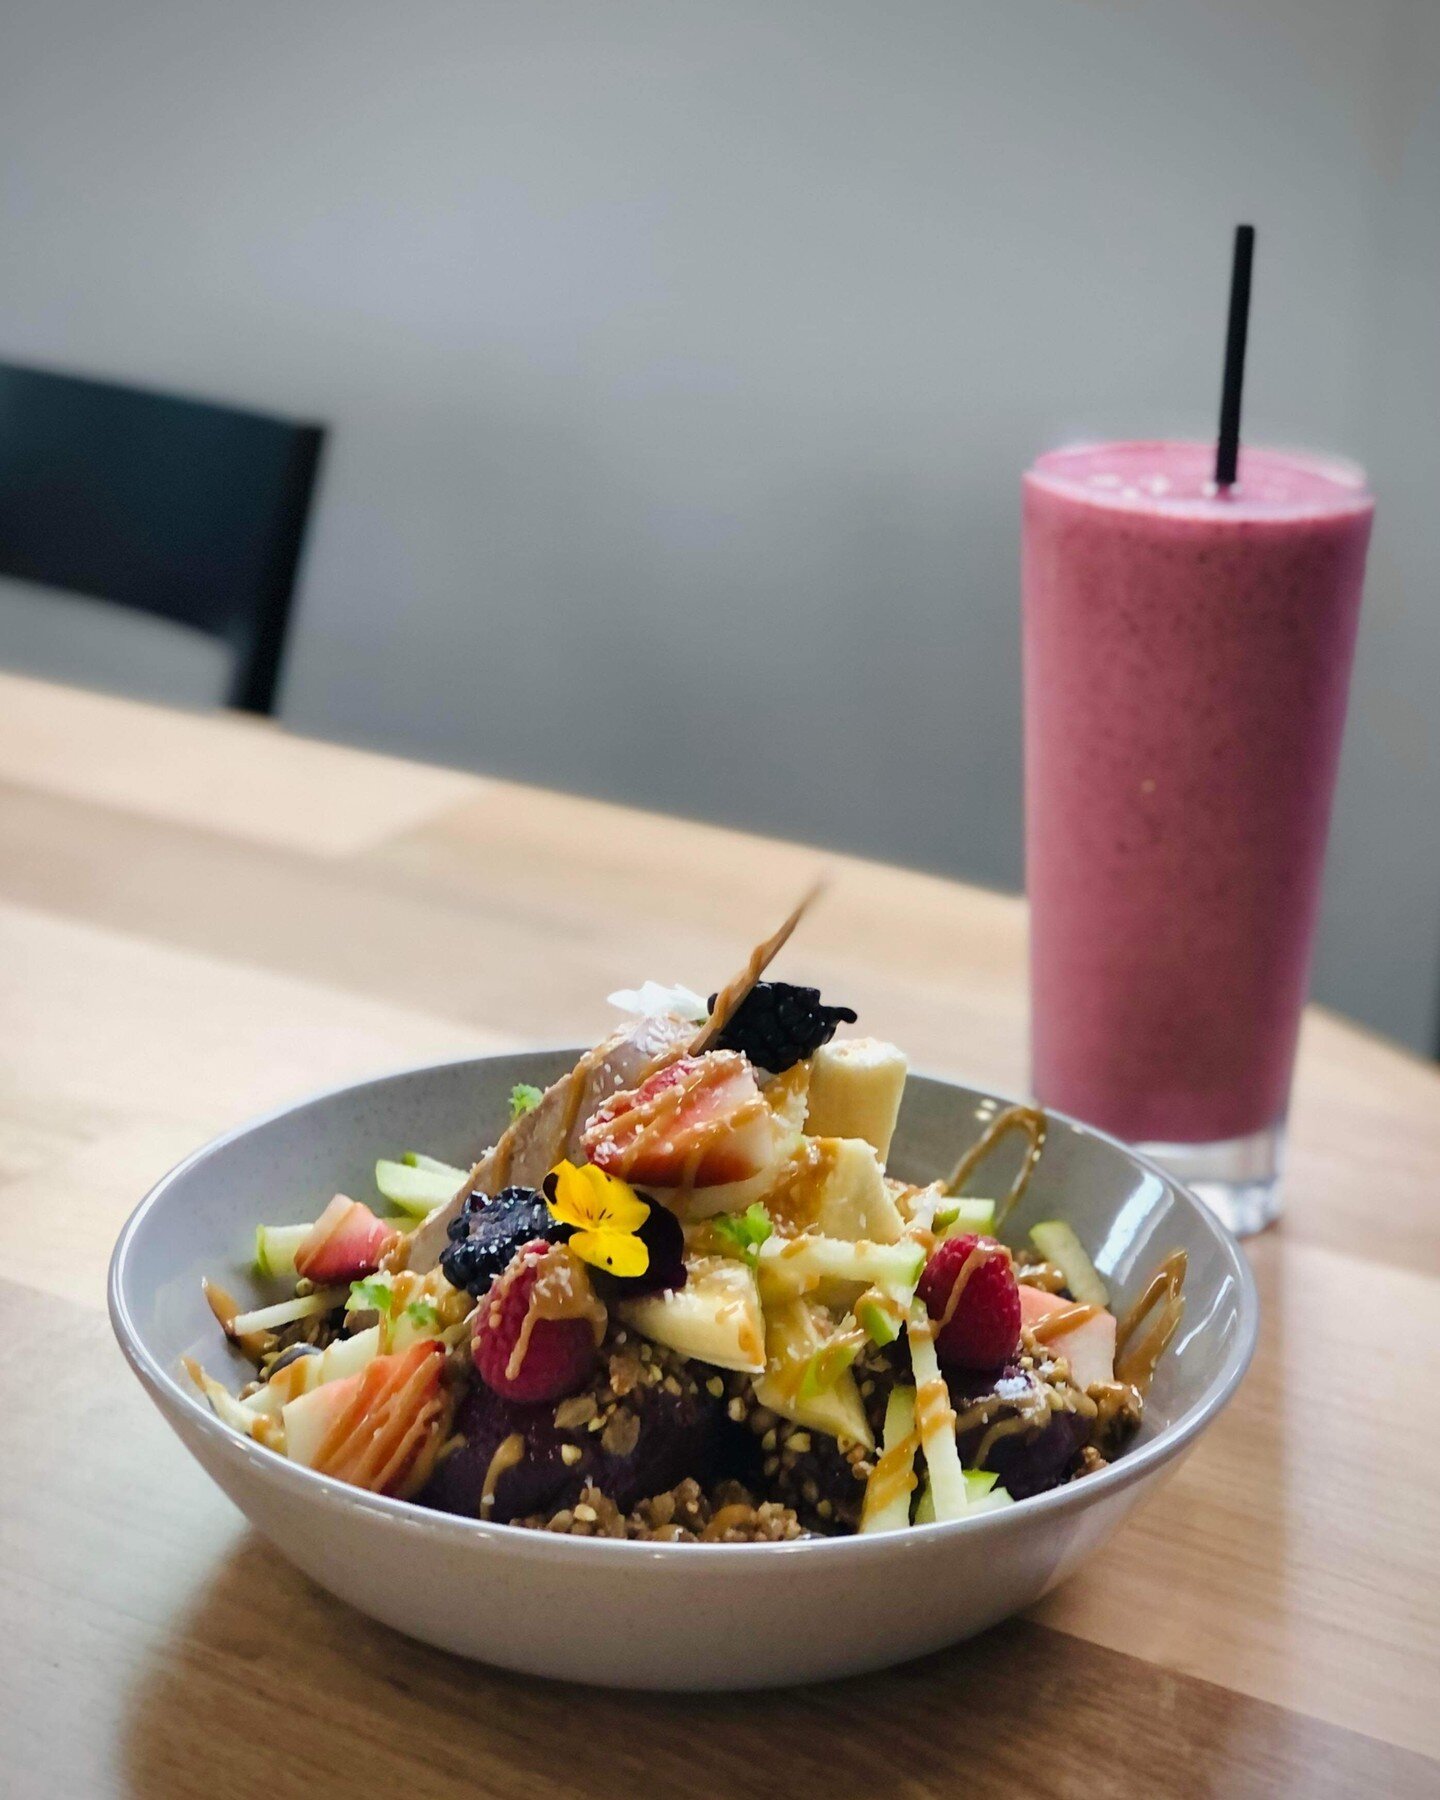 It&rsquo;s a perfect day for an A&ccedil;ai Bowl! 🍓🍌⁠
⁠
⁠
⁠
#extractedivanhoe #coffee #ivanhoecafe #dineinivanhoe #melbournecafe #hungry #delicious​#breakfast #healthylifestyle #supportlocal #brunchinmelbourne #foodiegram #coffeeshop #melbourne #fo